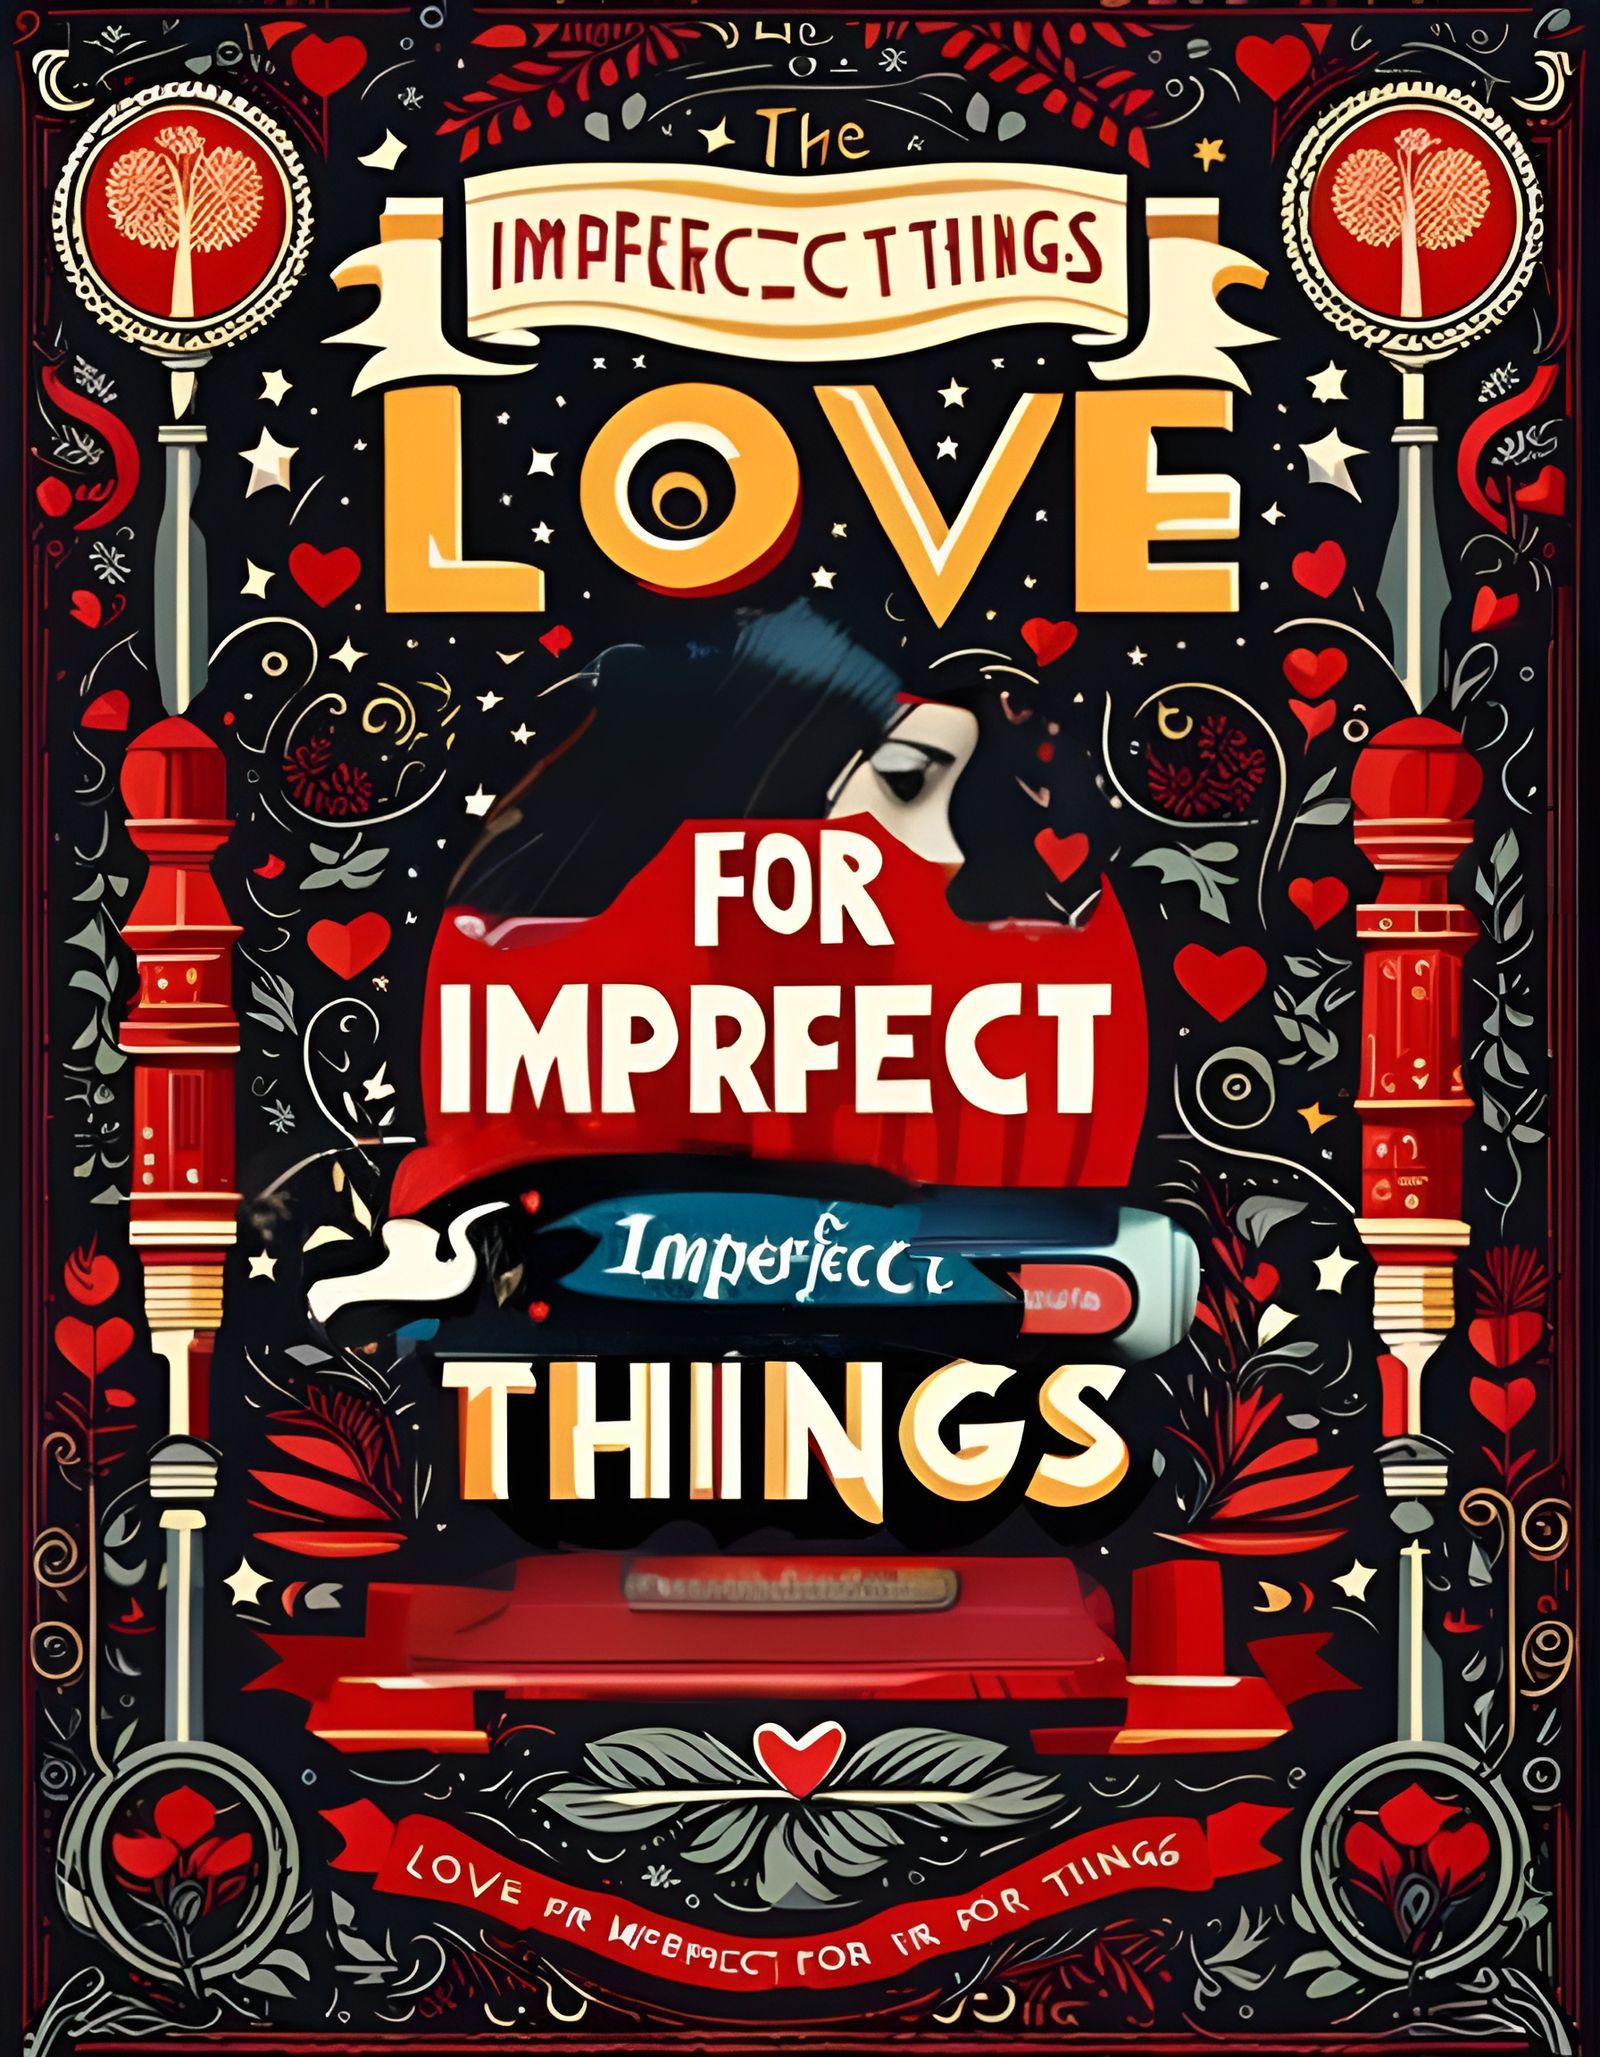 My Open Prompt: “Love for Imperfect Things” - Book Cover